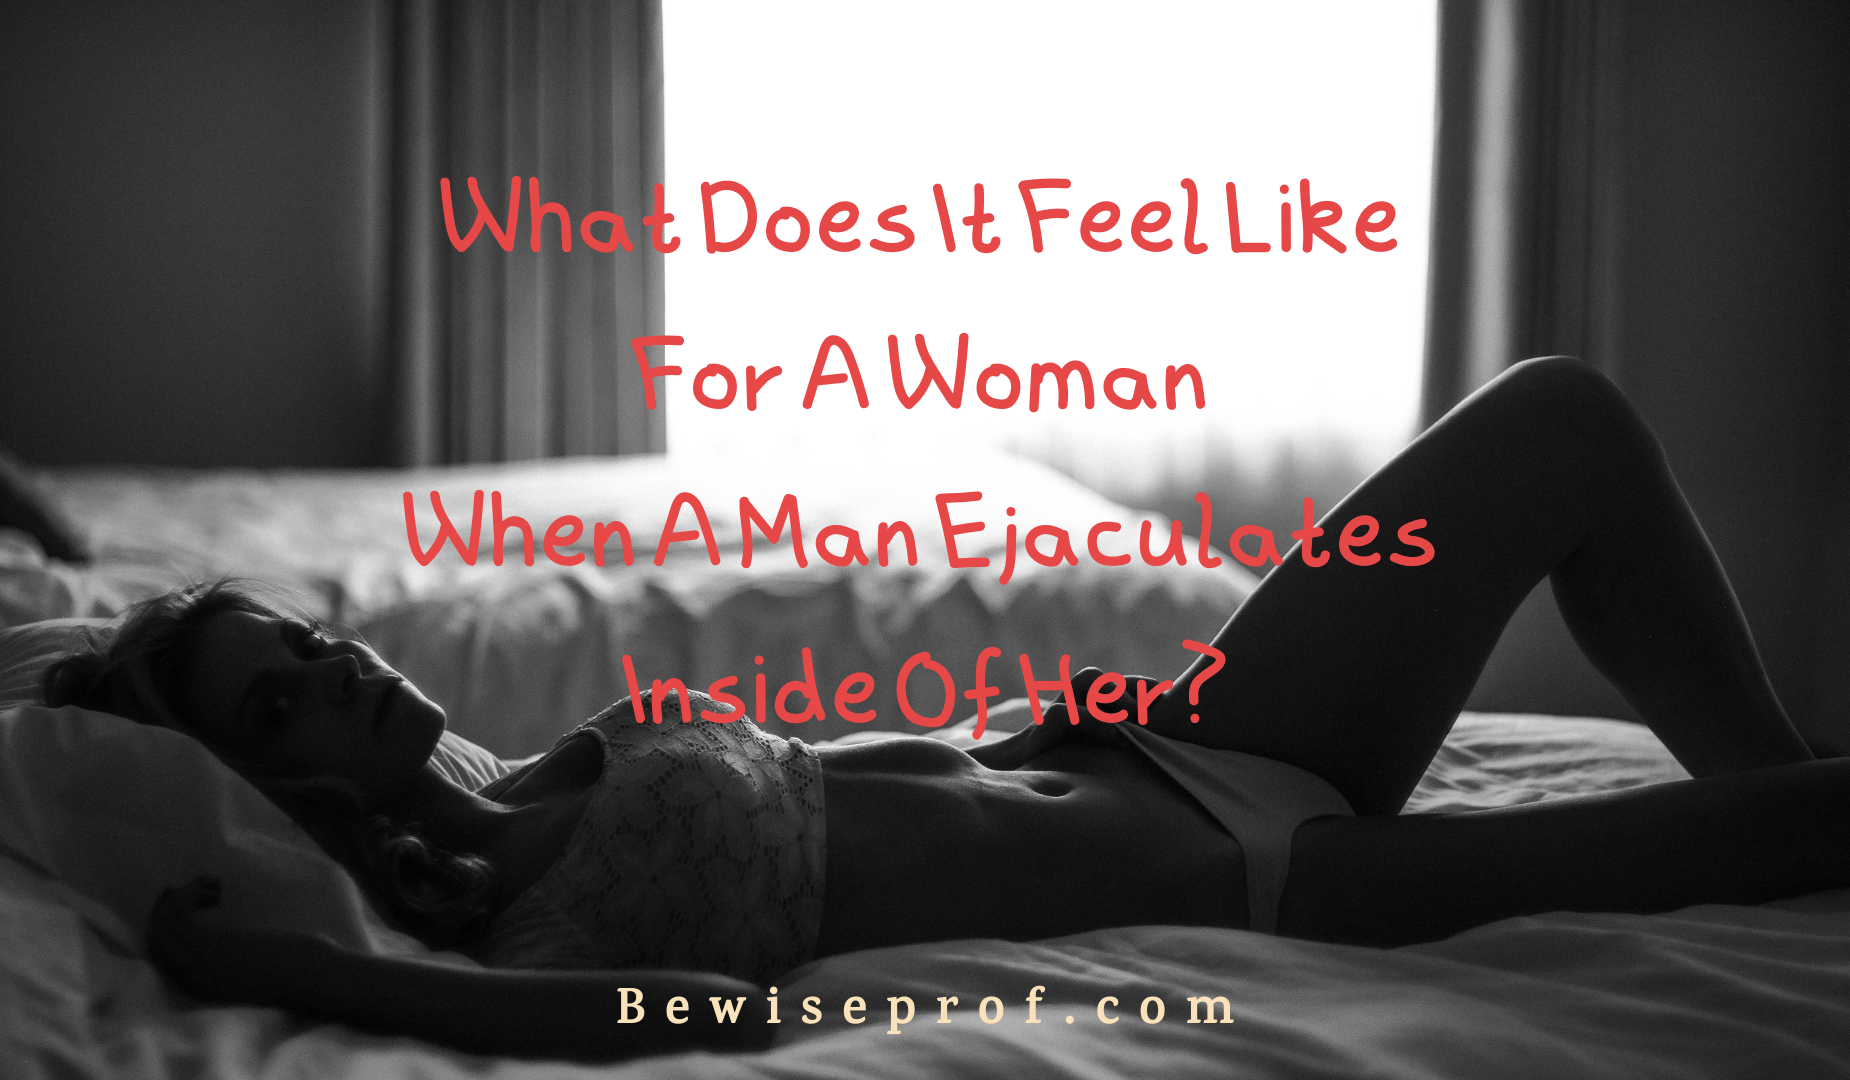 What Does It Feel Like For A Woman When A Man Ejaculates Inside Of Her?